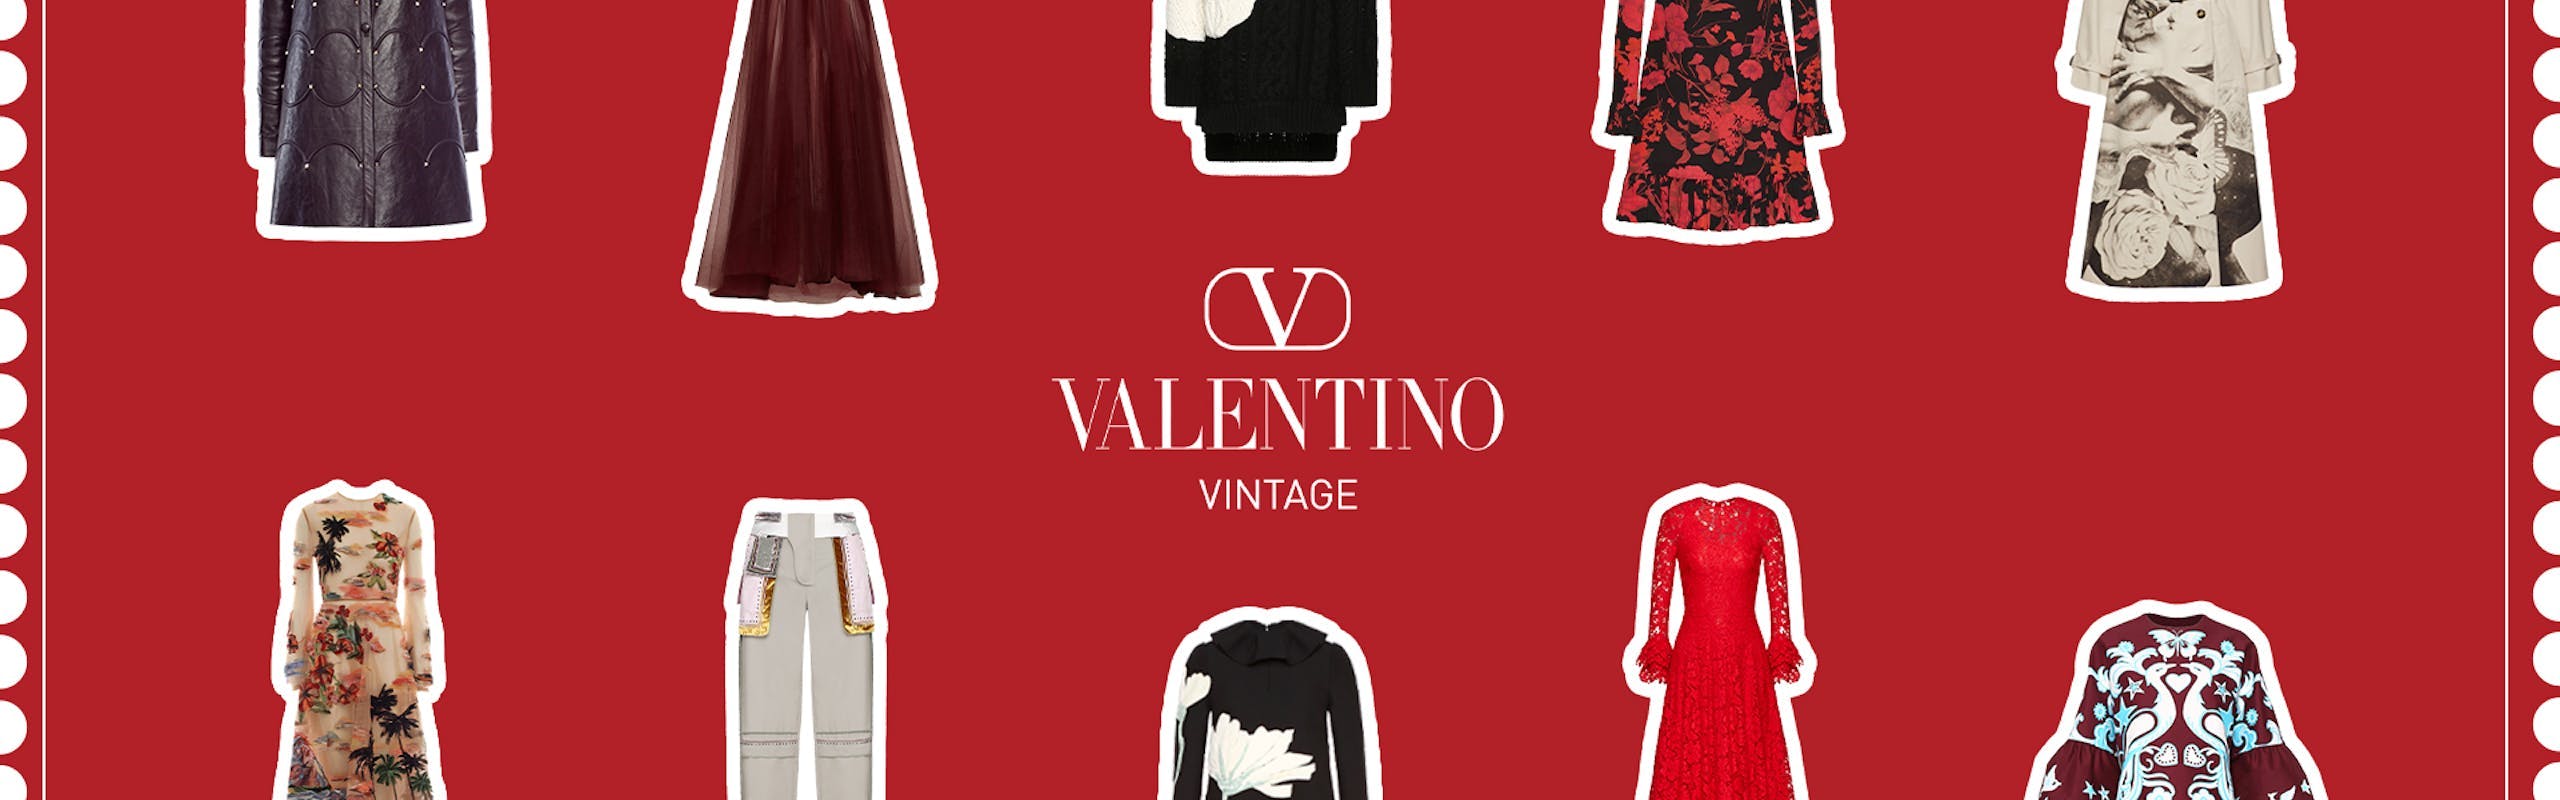 Valentino Vintage: the new circular system that reinvents fashion